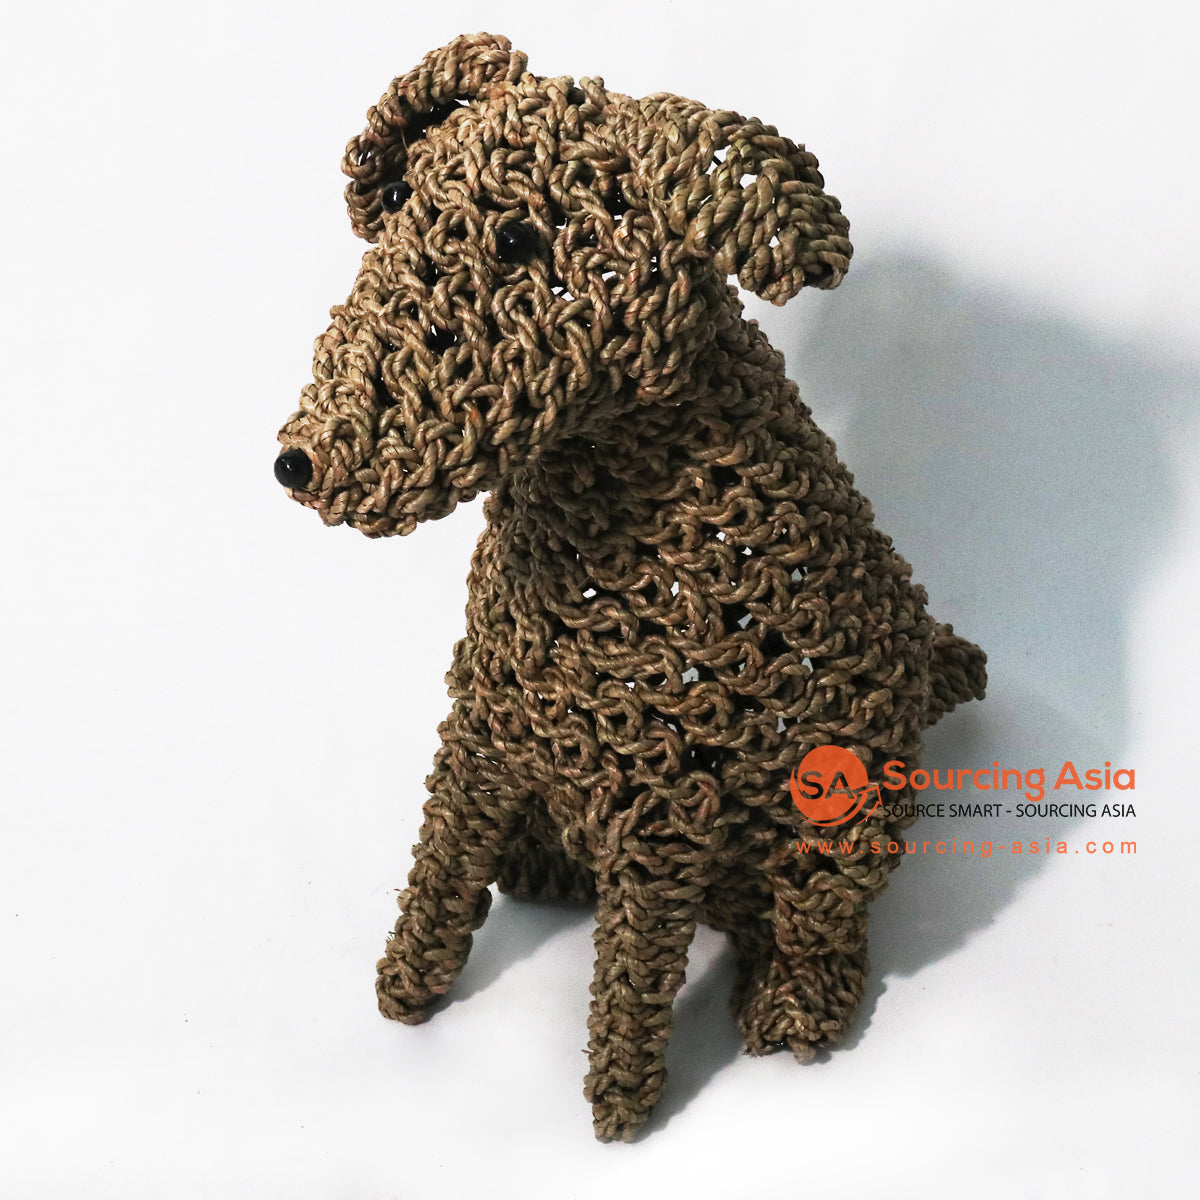 SYP06L NATURAL WOVEN SEAGRASS LARGE DOG DECORATION